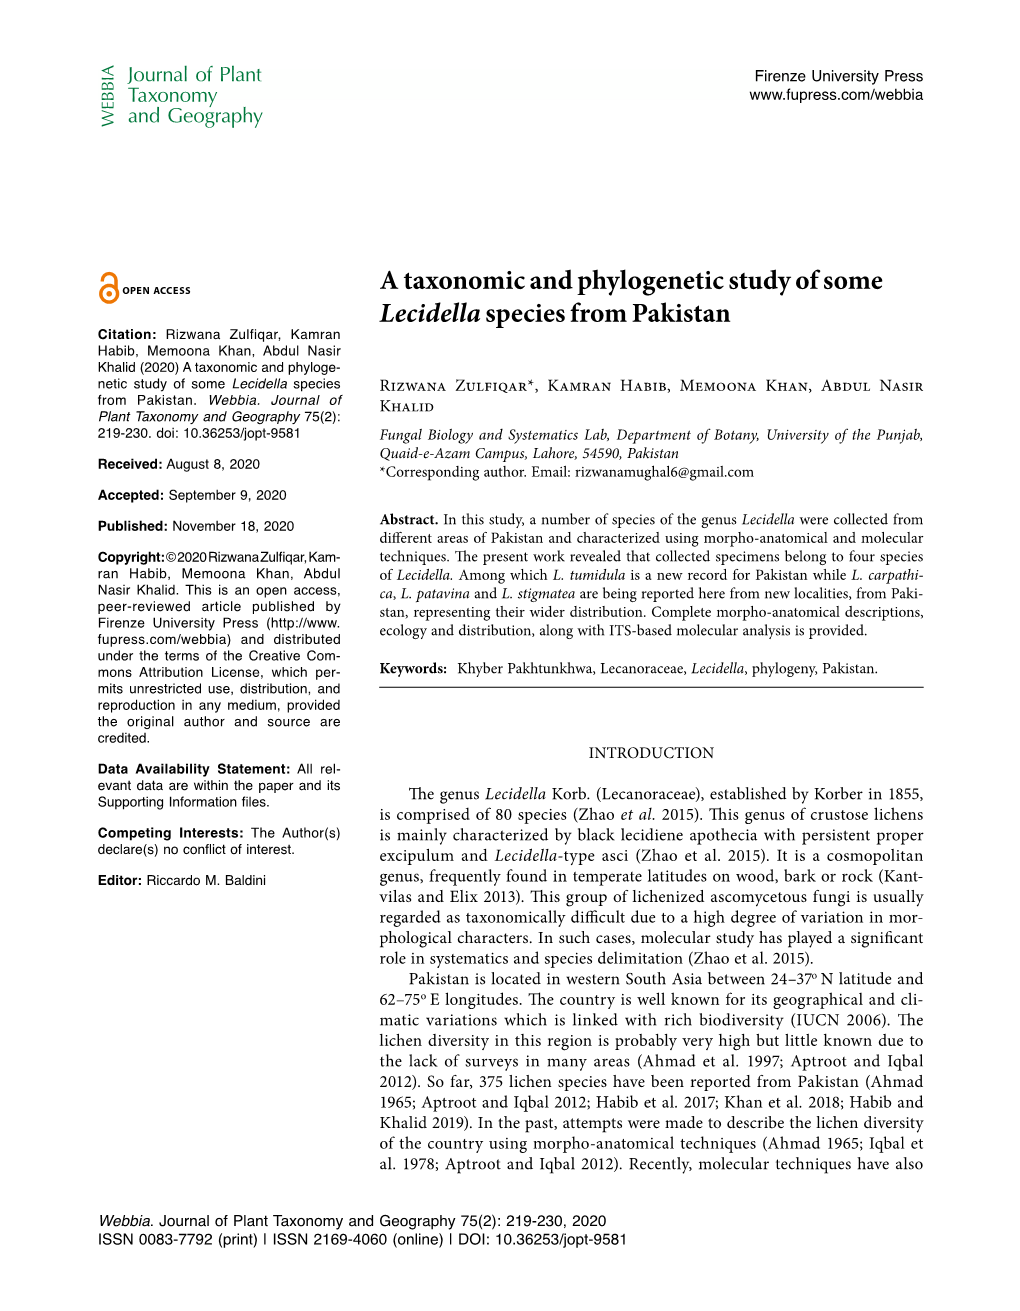 A Taxonomic and Phylogenetic Study of Some Lecidella Species From